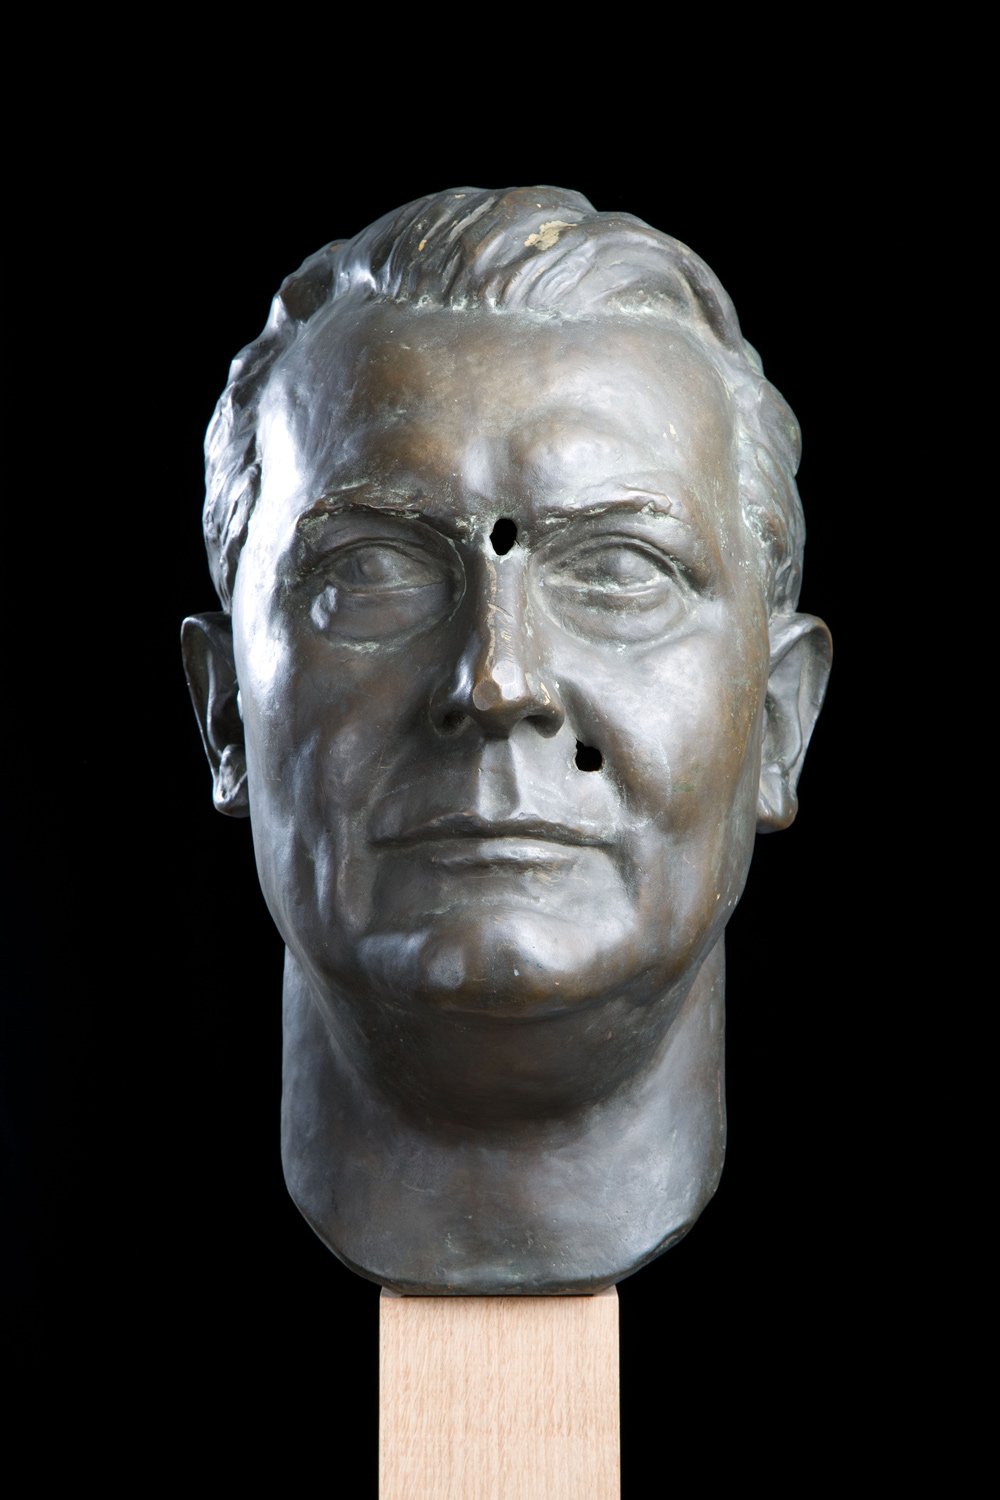 Sculpture of Hermann Goring’s head – with bullet holes